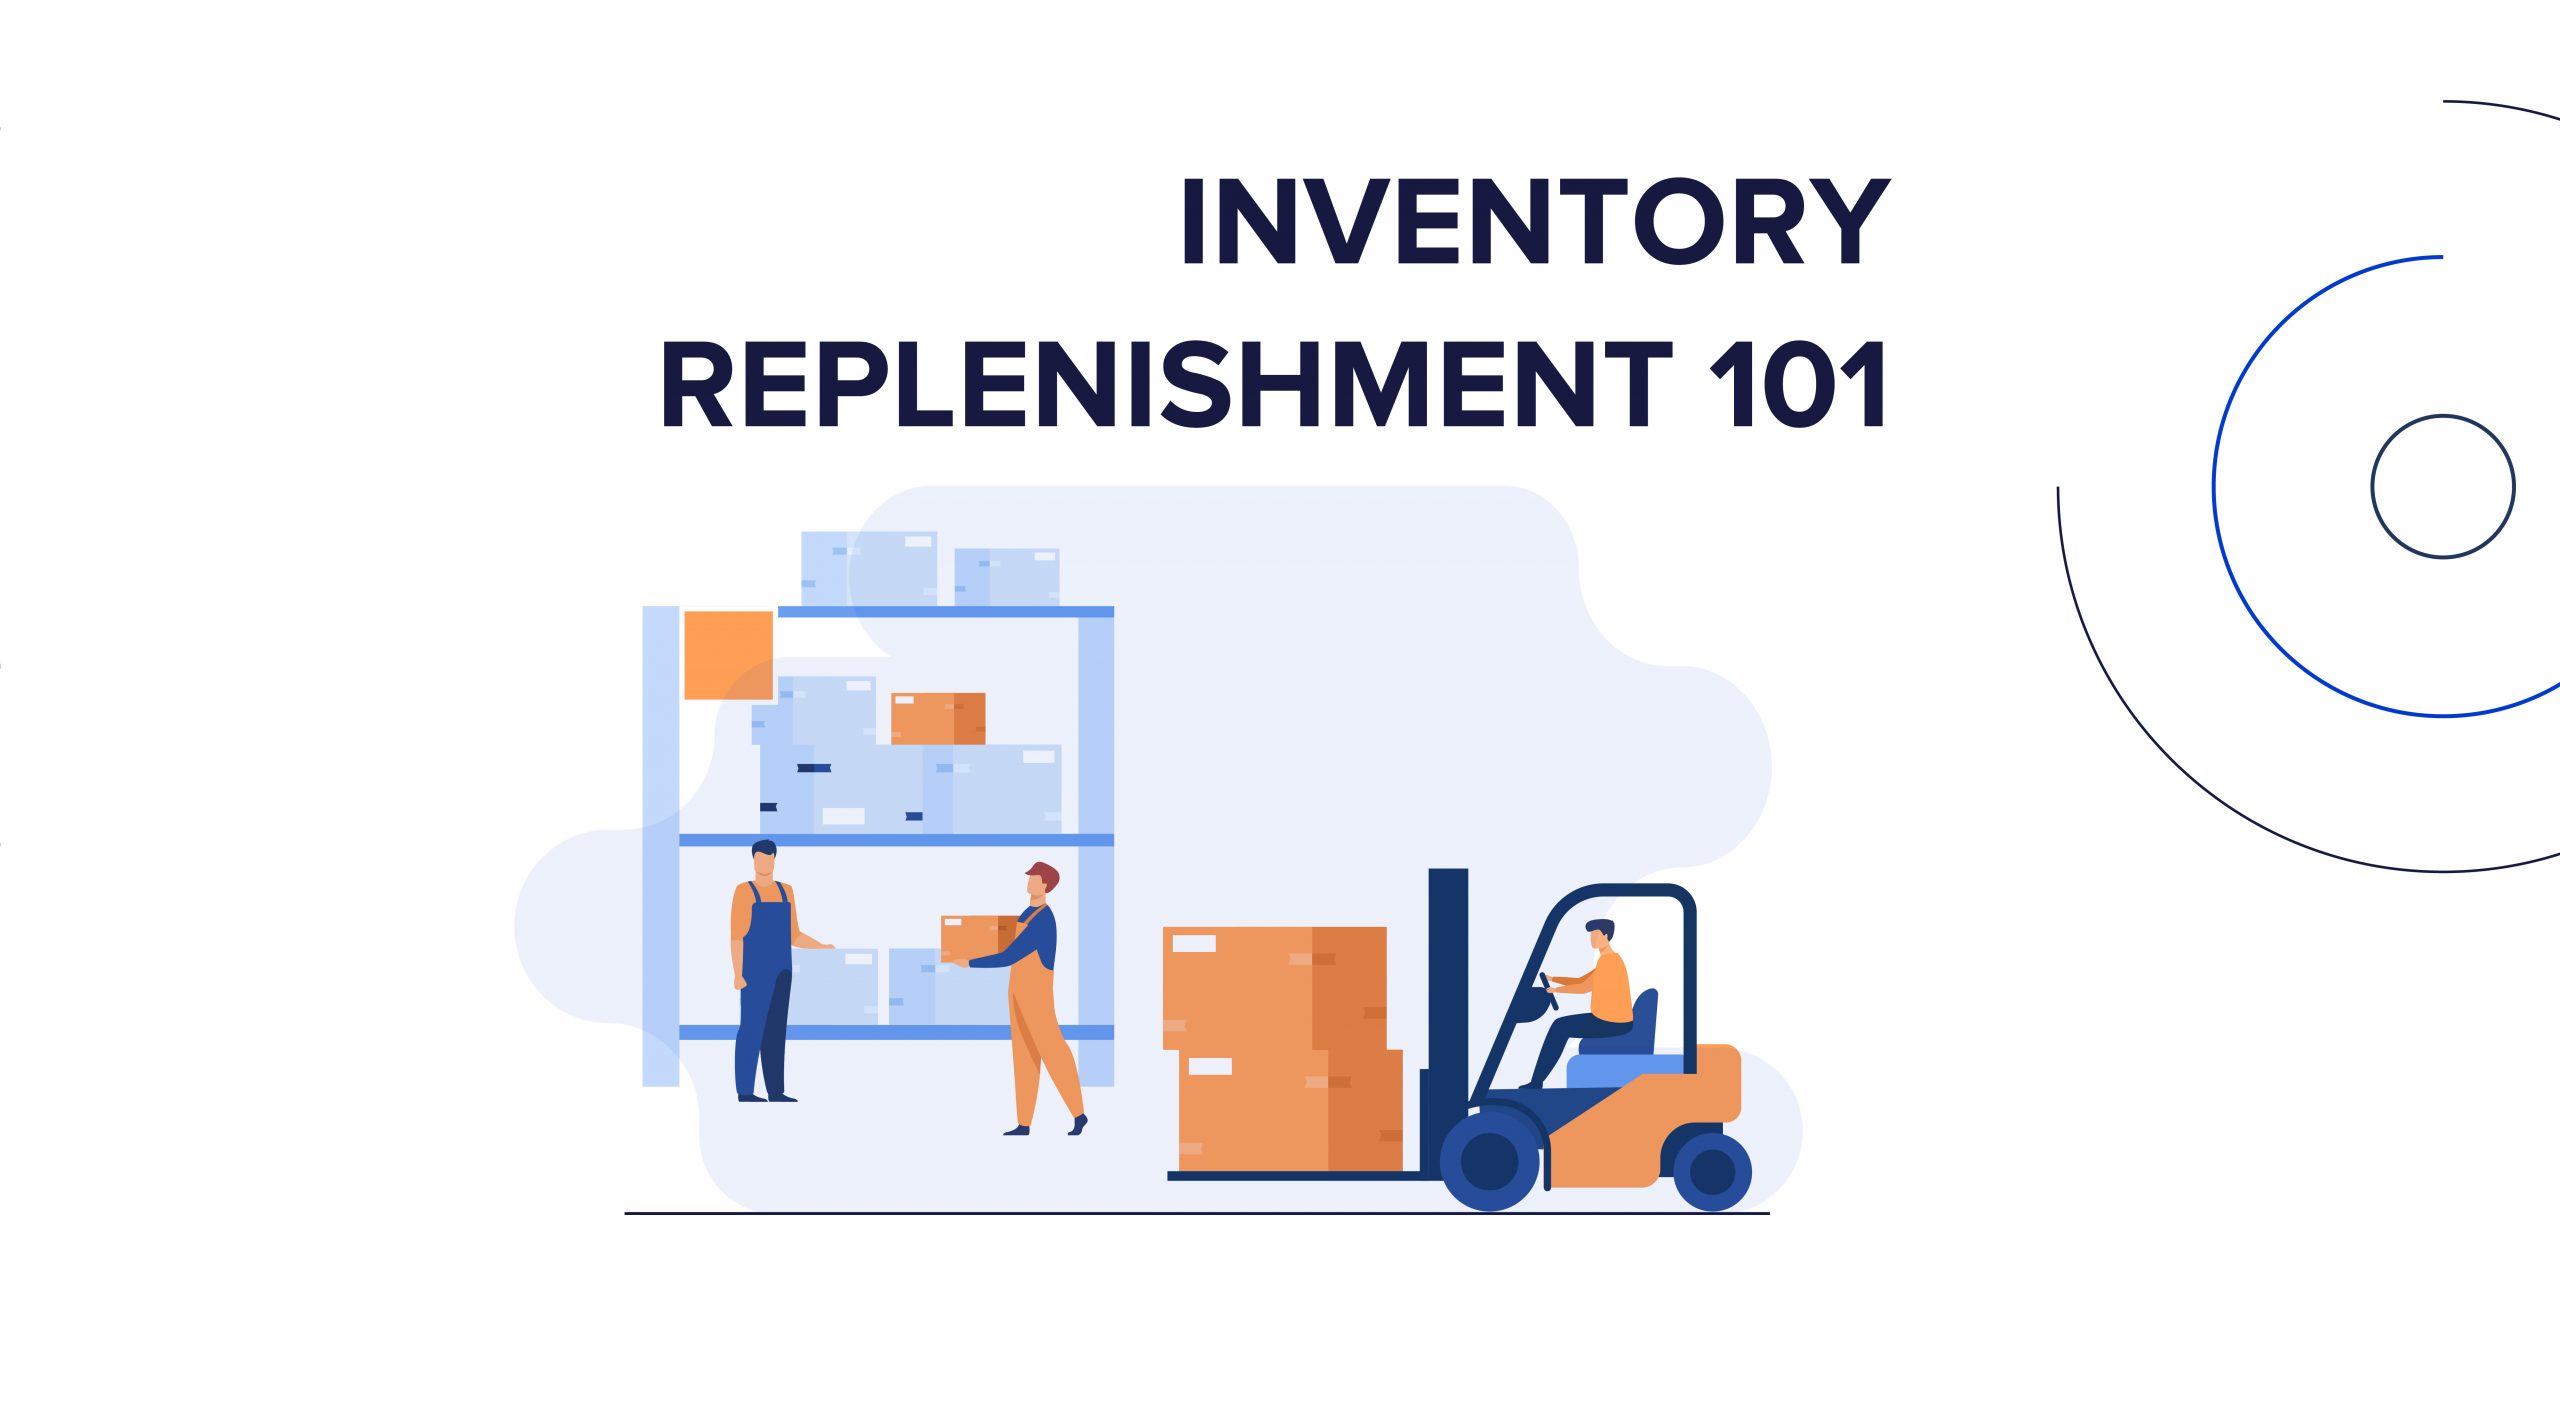 https://eswap.global/wp-content/uploads/2021/10/Inventory-Replenishment-Explained-scaled.jpg